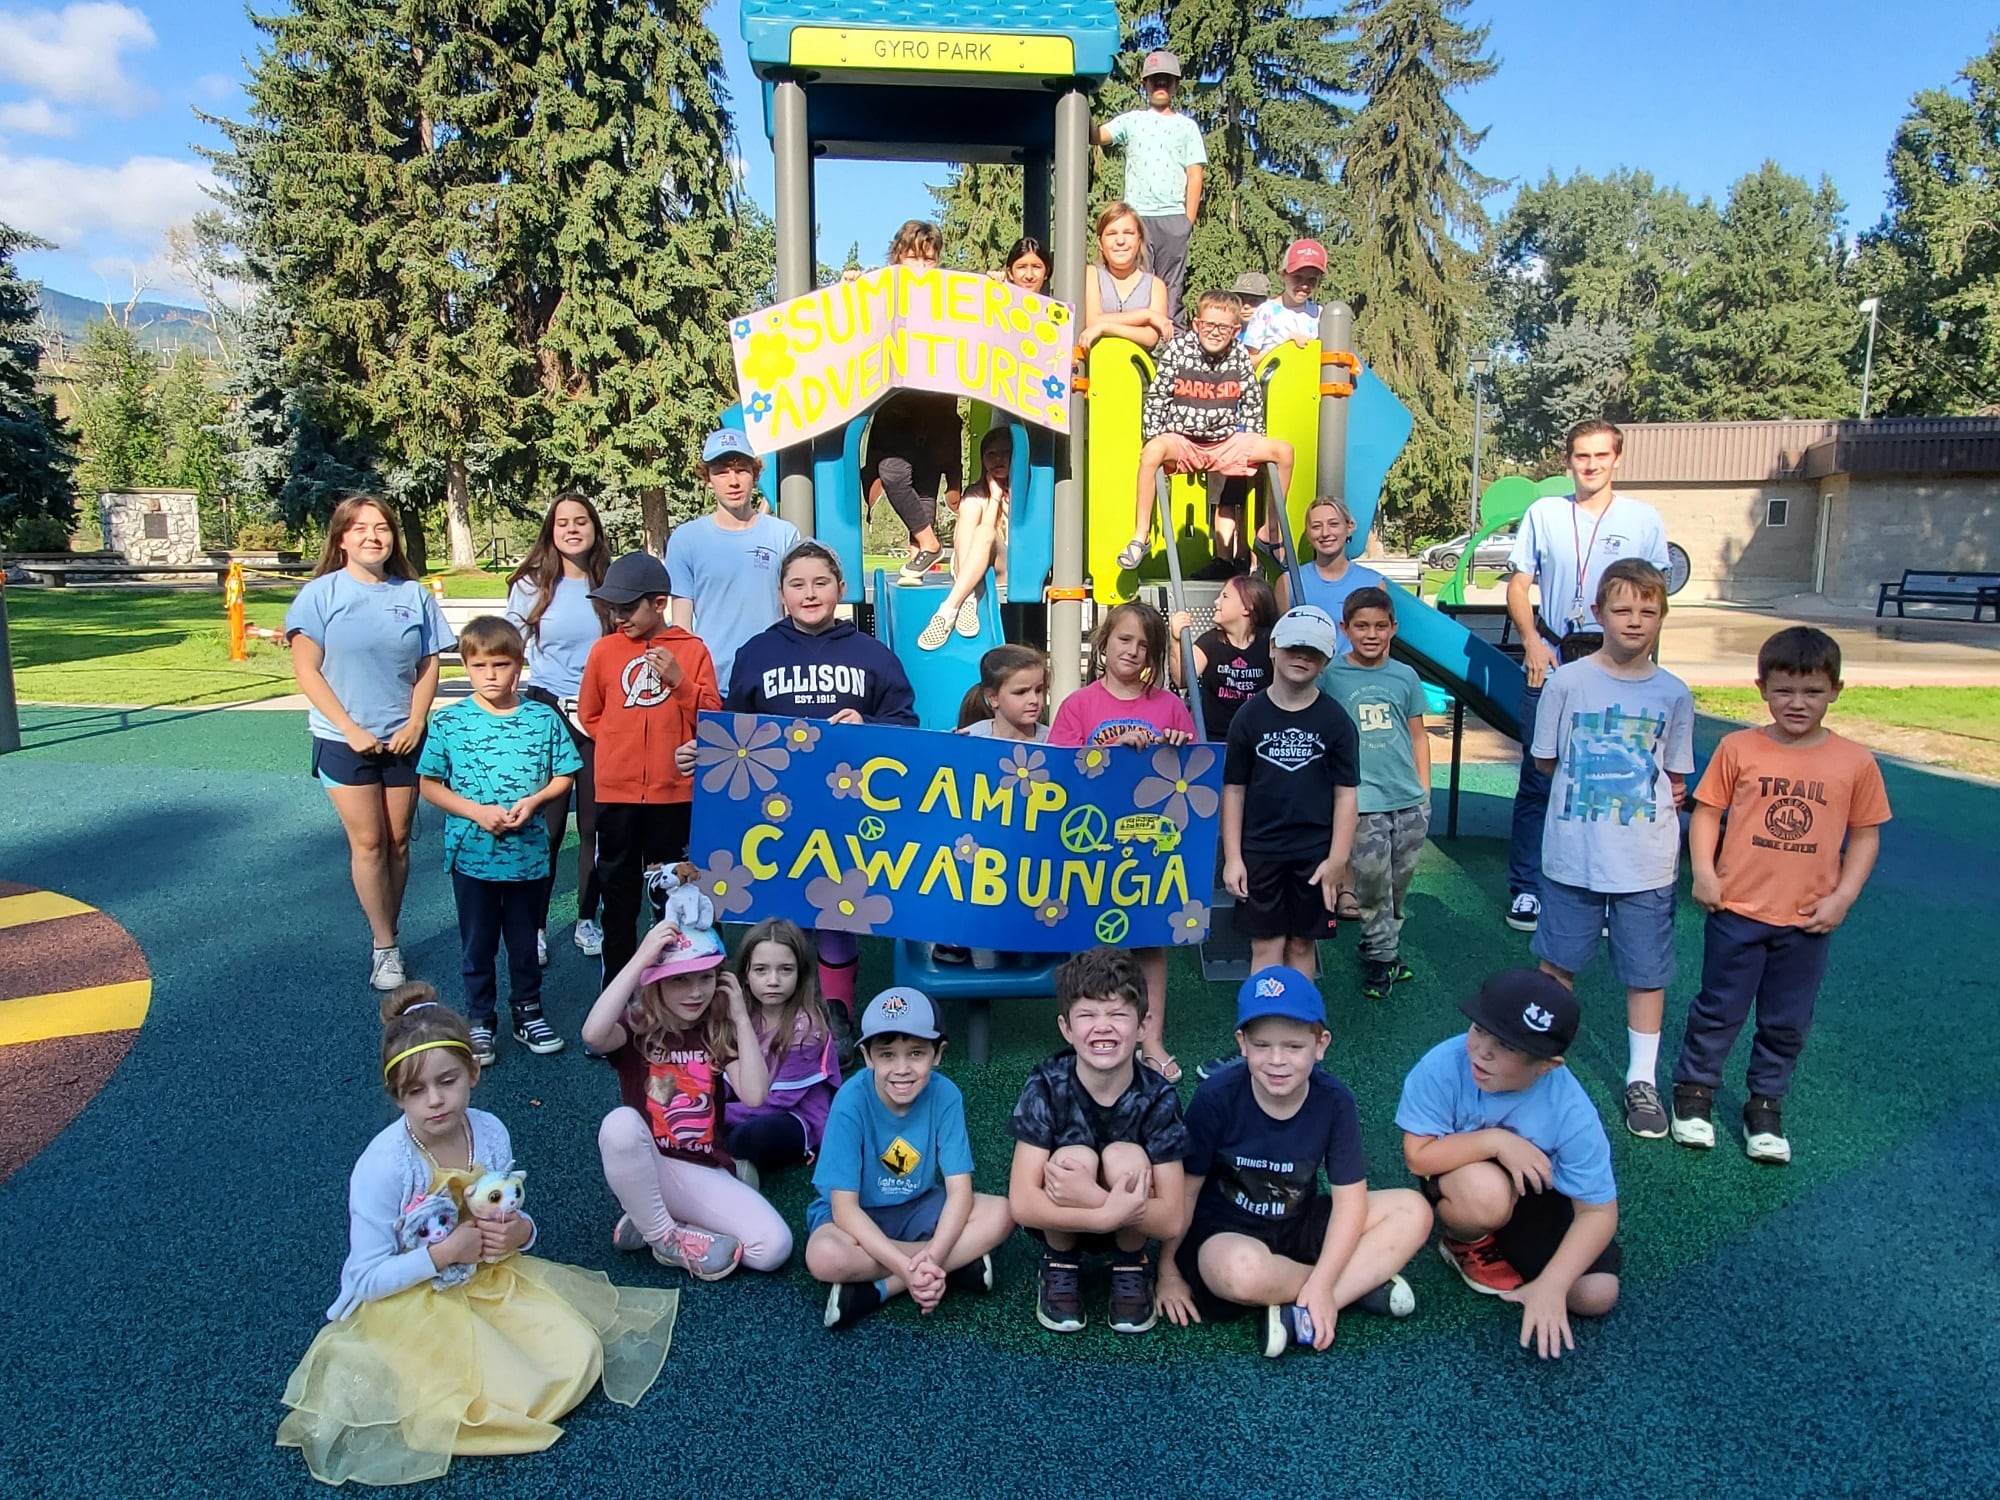 Summer camp leaders needed for Camp Cawabunga & Adventure Camp to run this summer